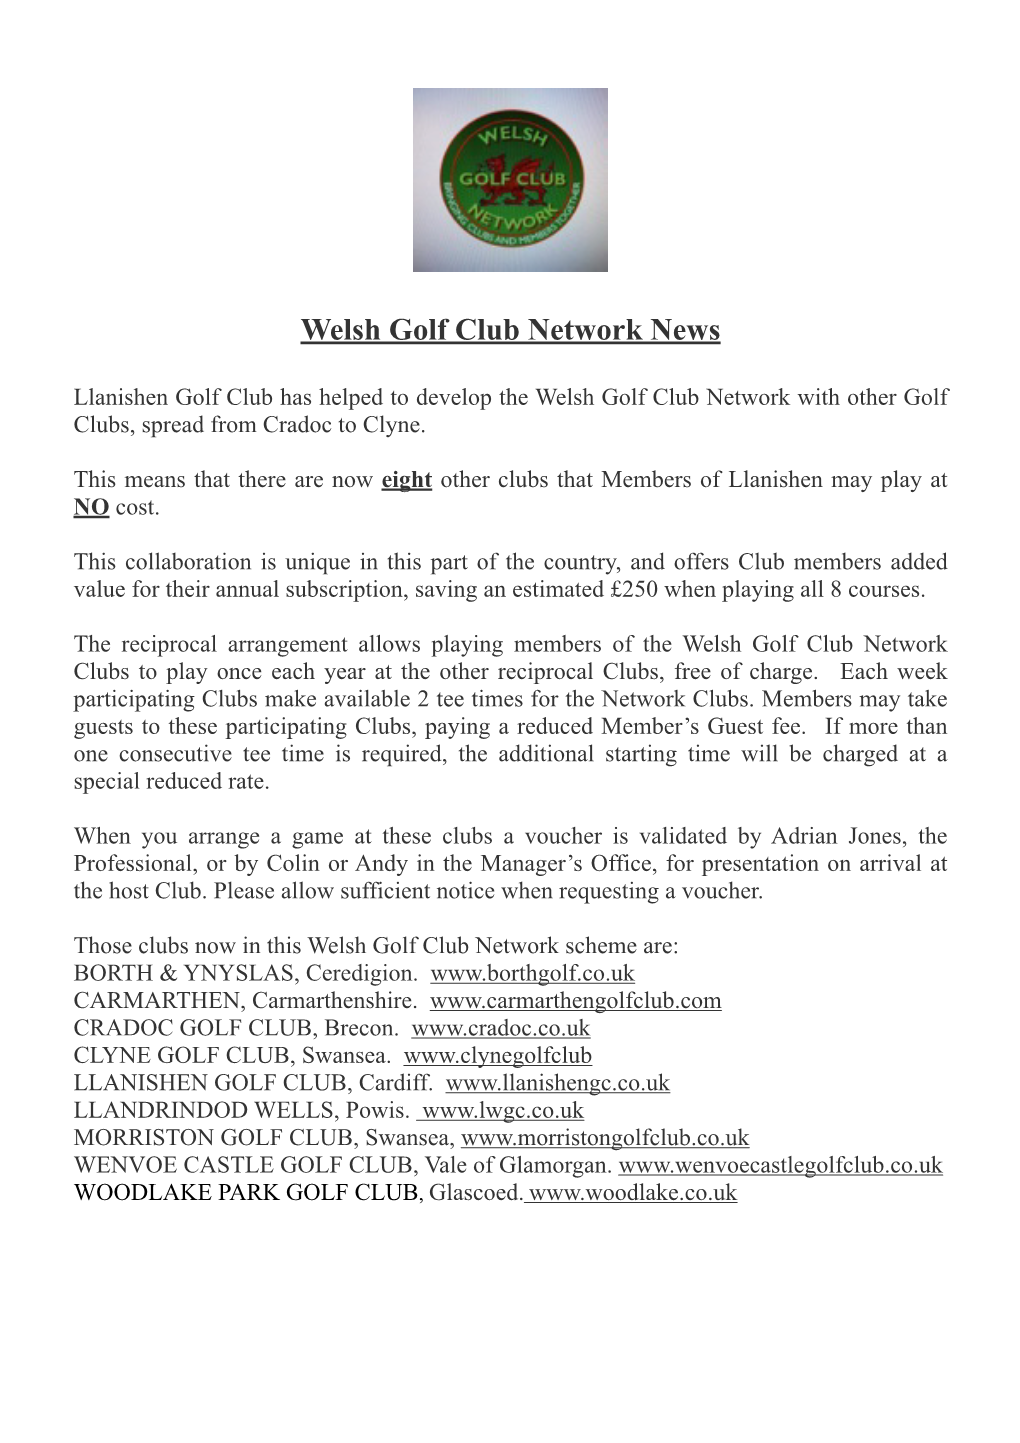 Welsh Golf Club Network News ! Llanishen Golf Club Has Helped to Develop the Welsh Golf Club Network with Other Golf Clubs, Spread from Cradoc to Clyne